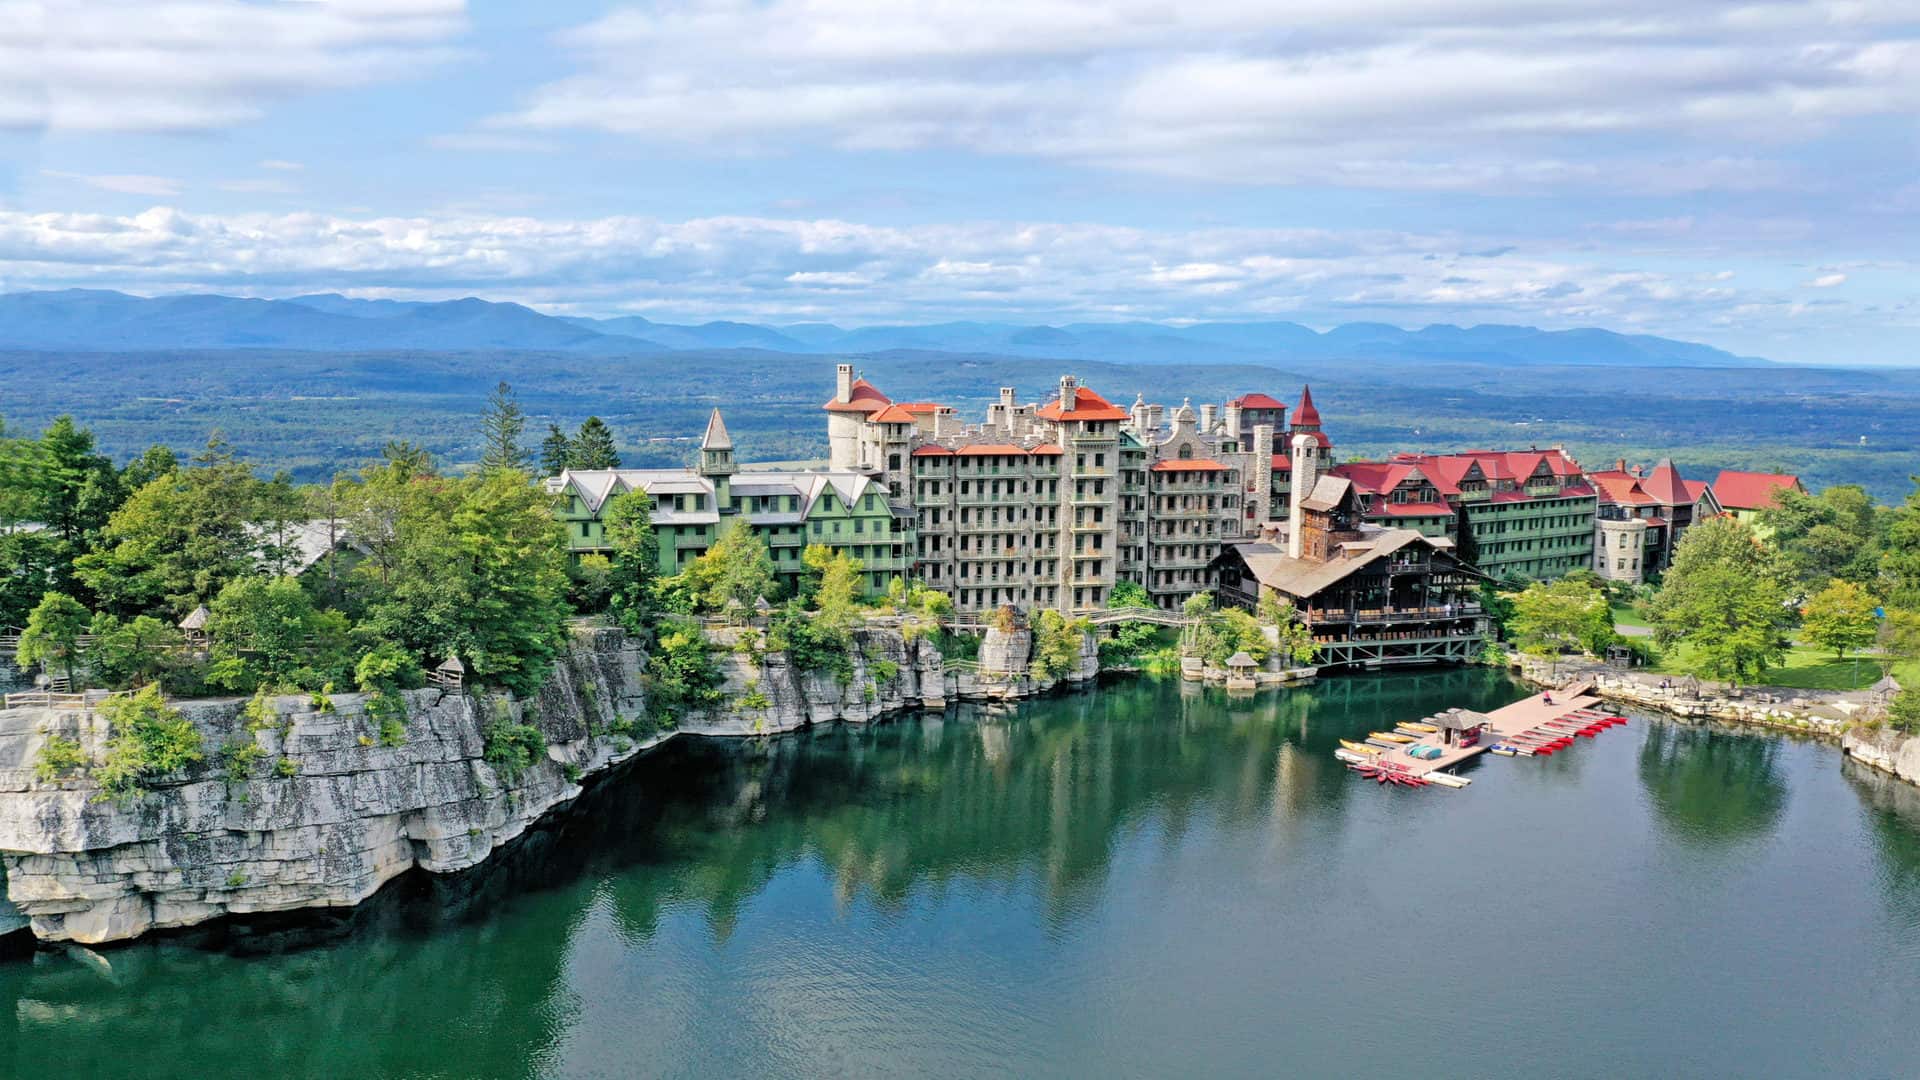 Mohonk Mountain House Aerial View